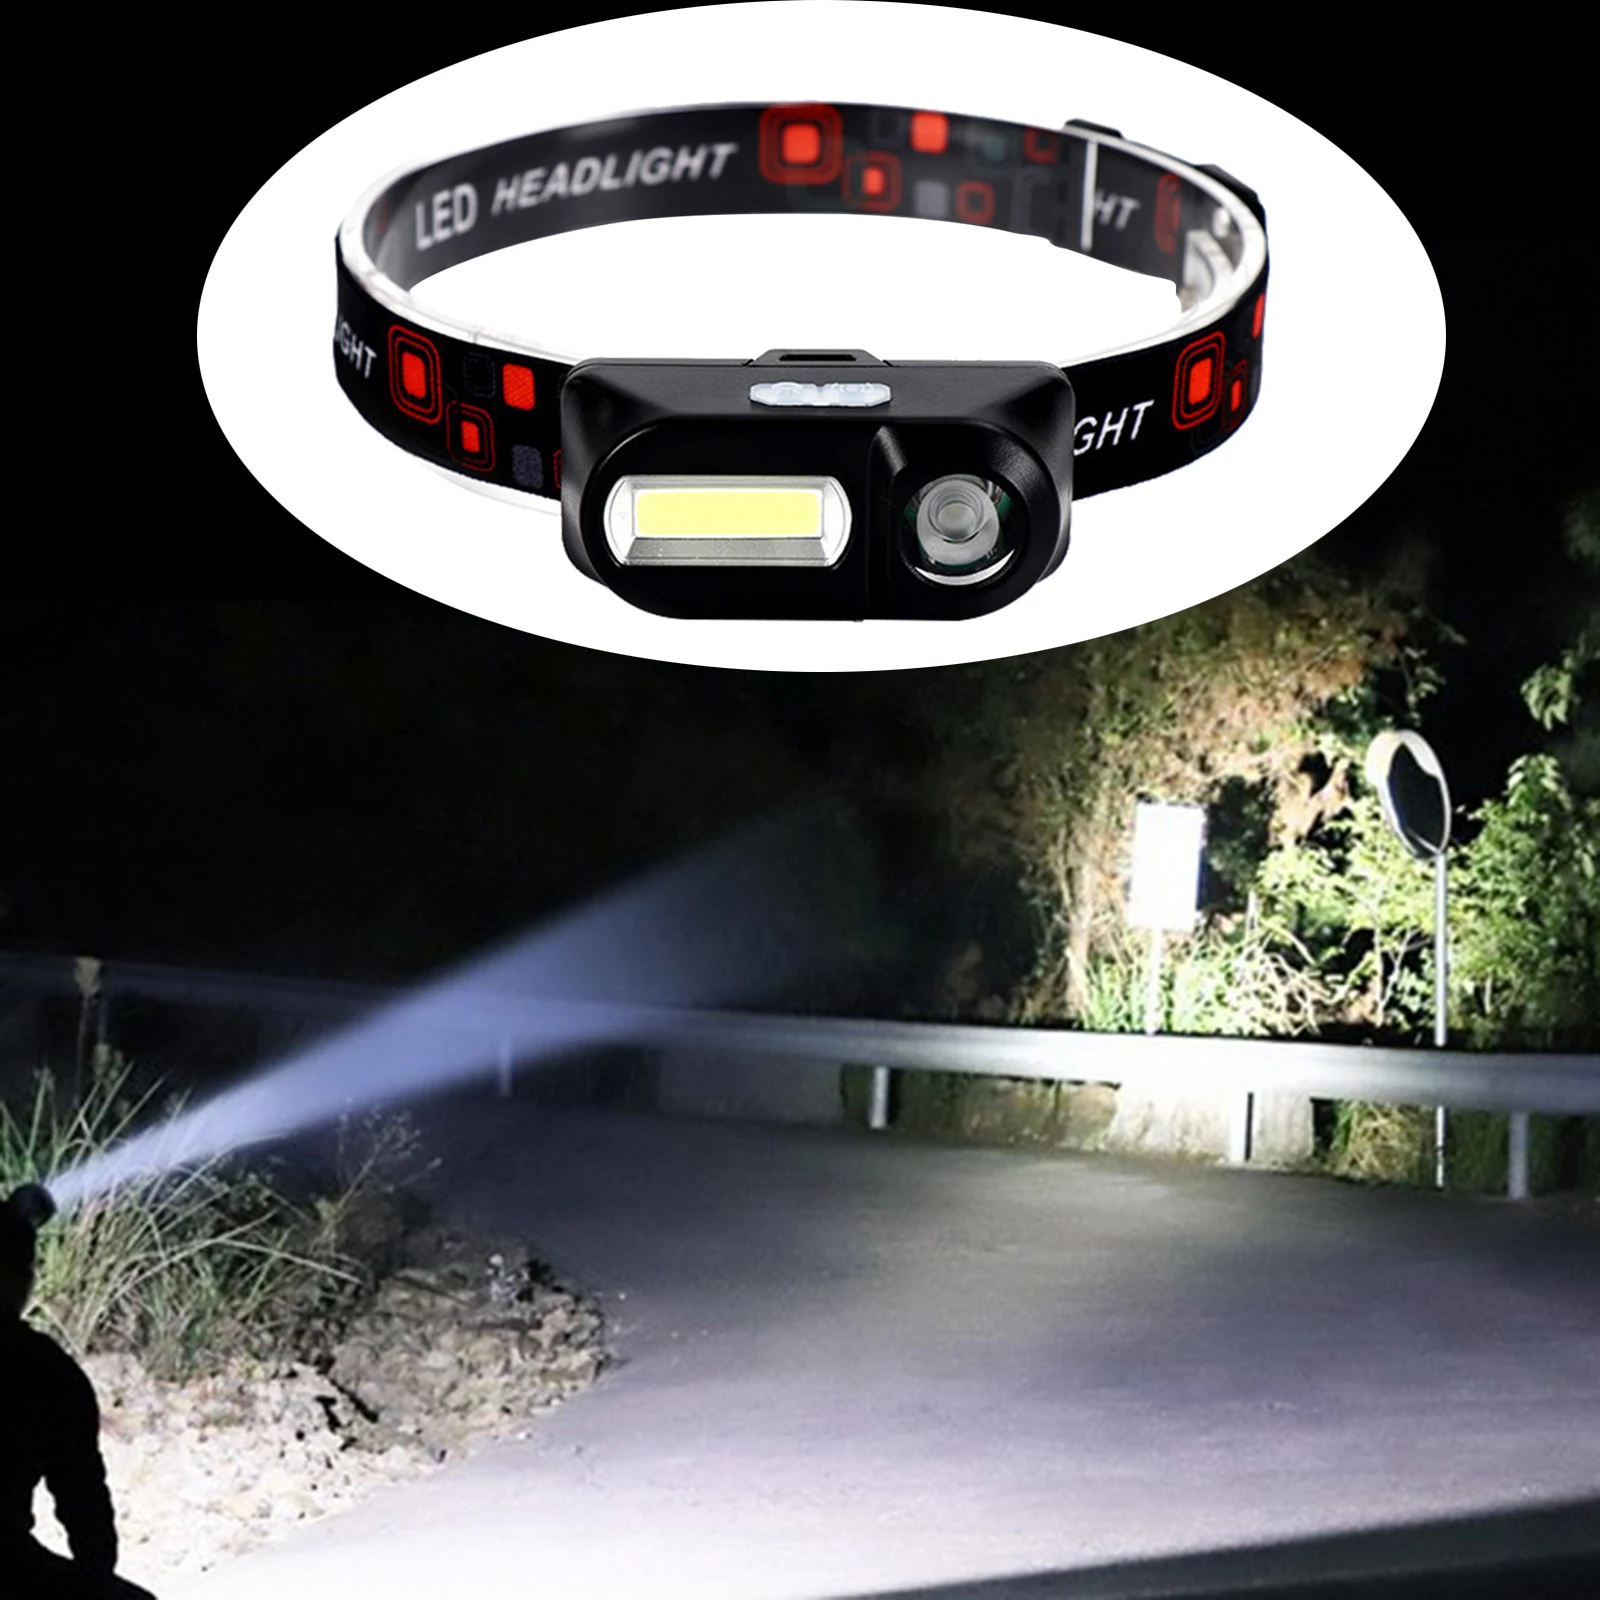 Super Bright Head Torch USB Rechargeable Headlamp Ultra Light LED COB Head Torch Headlight with 6 Modes for Reading, Hiking